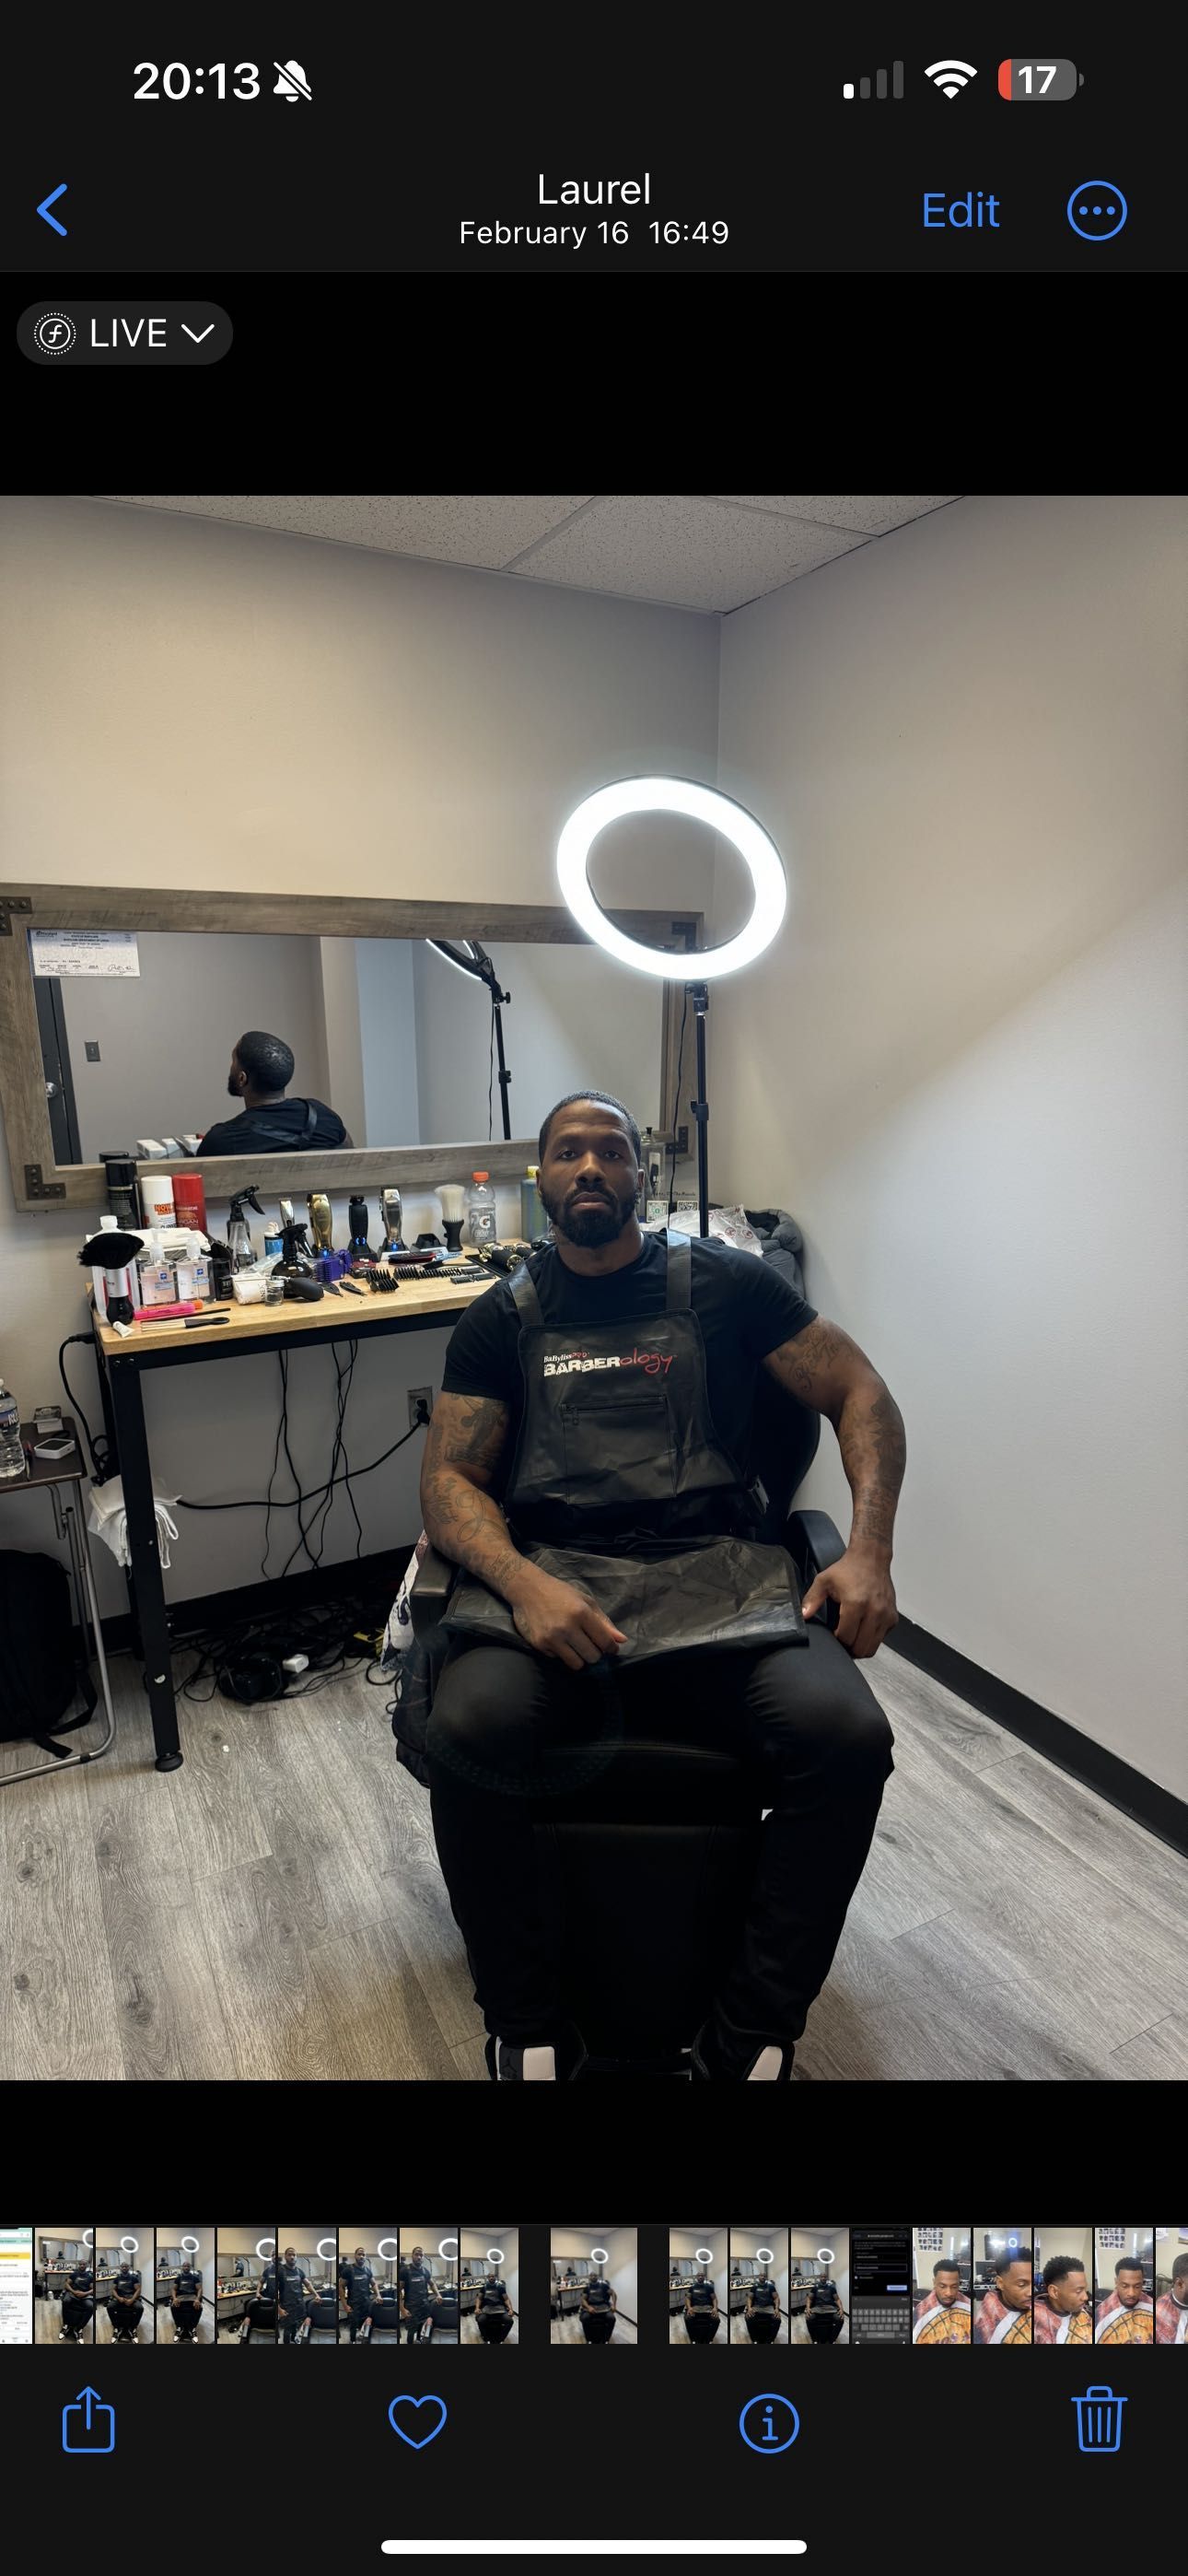 OffTheMuscle Mobile Barbering And Massage(Chris), Fort Eustis, Newport News, 23604